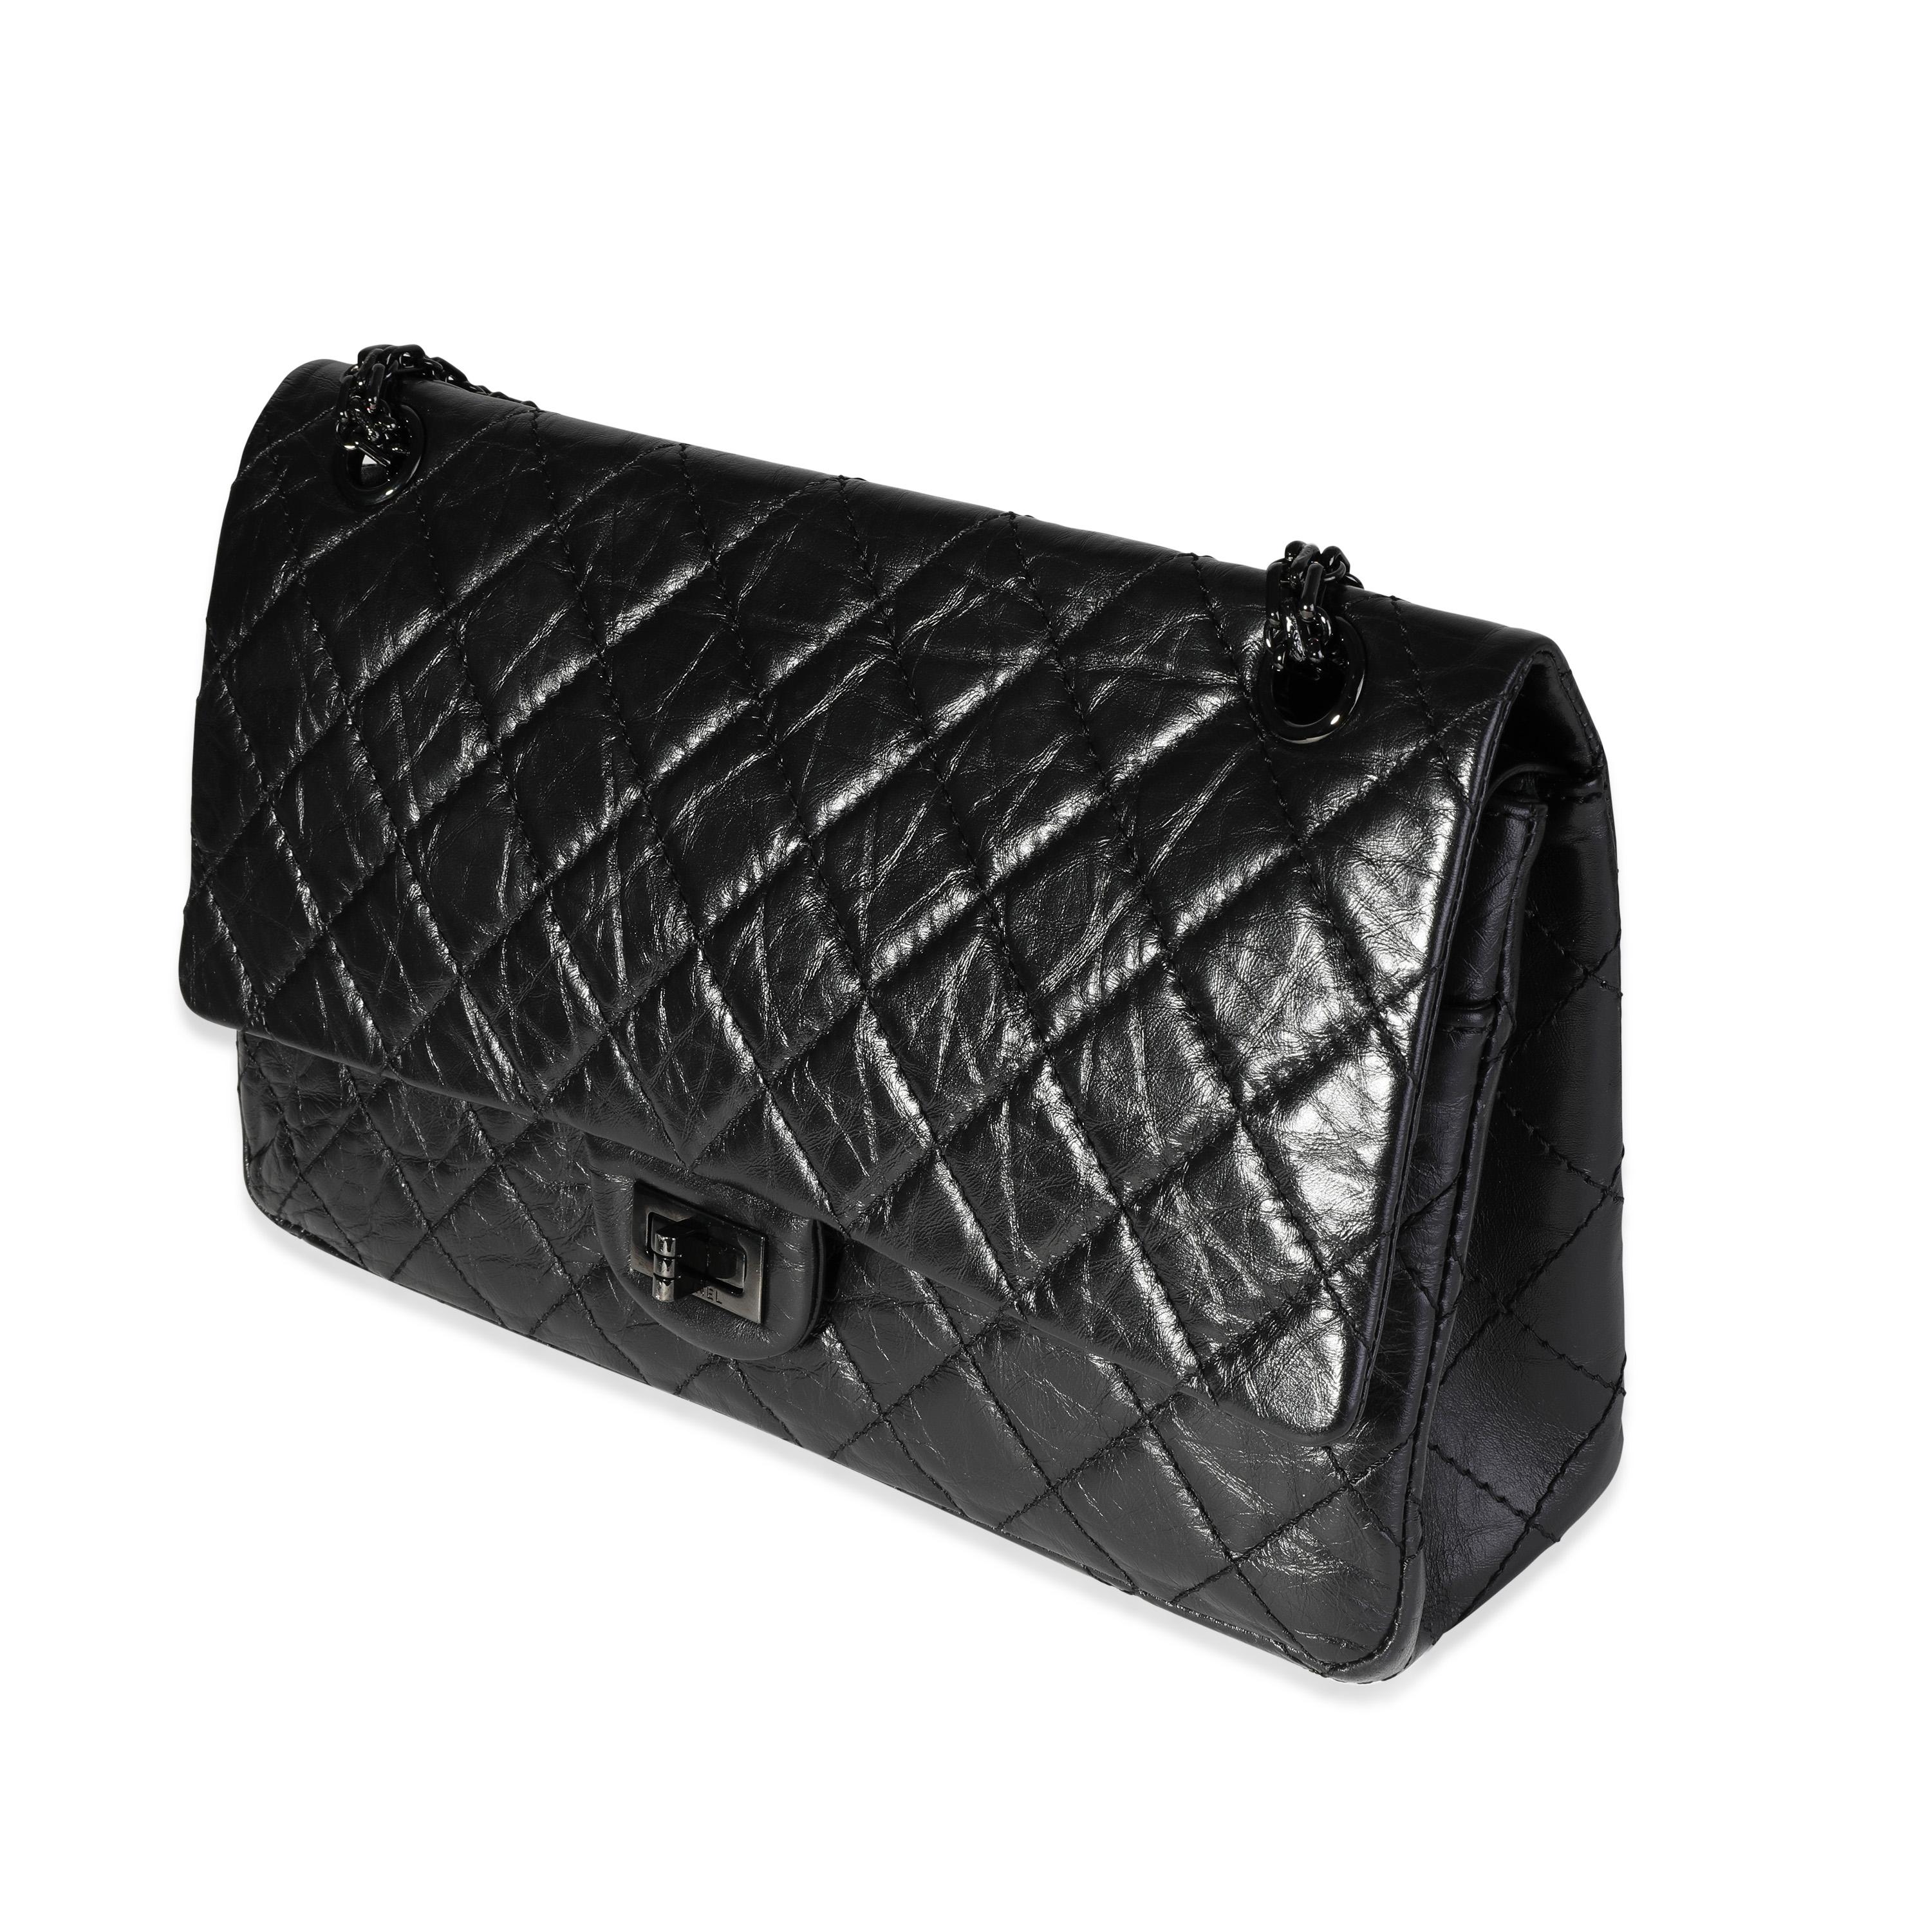 Listing Title: Chanel So Black Quilted Calfskin Reissue 2.55 226 Double Flap Bag
SKU: 118564

Handbag Condition: Very Good
Condition Comments: Creasing to leather.
Brand: Chanel
Origin Country: France
Handbag Silhouette: Shoulder Bag
Occasions: